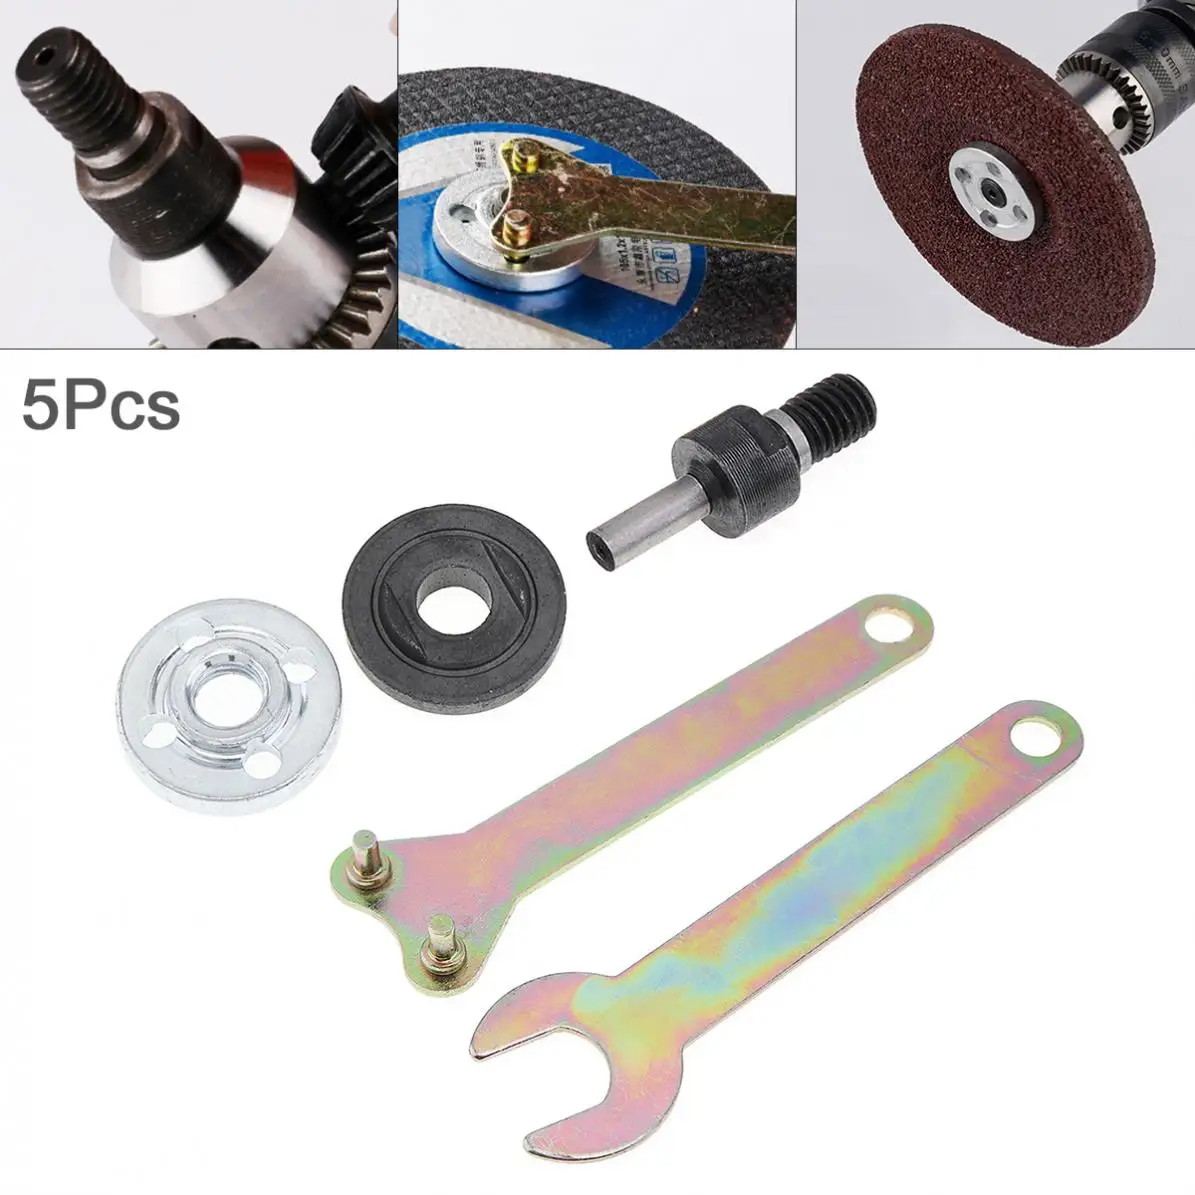 Details about   6pcs/Set Electric Drill Manual Abrasive Tool Grinding Wheels Adapter Fittings 